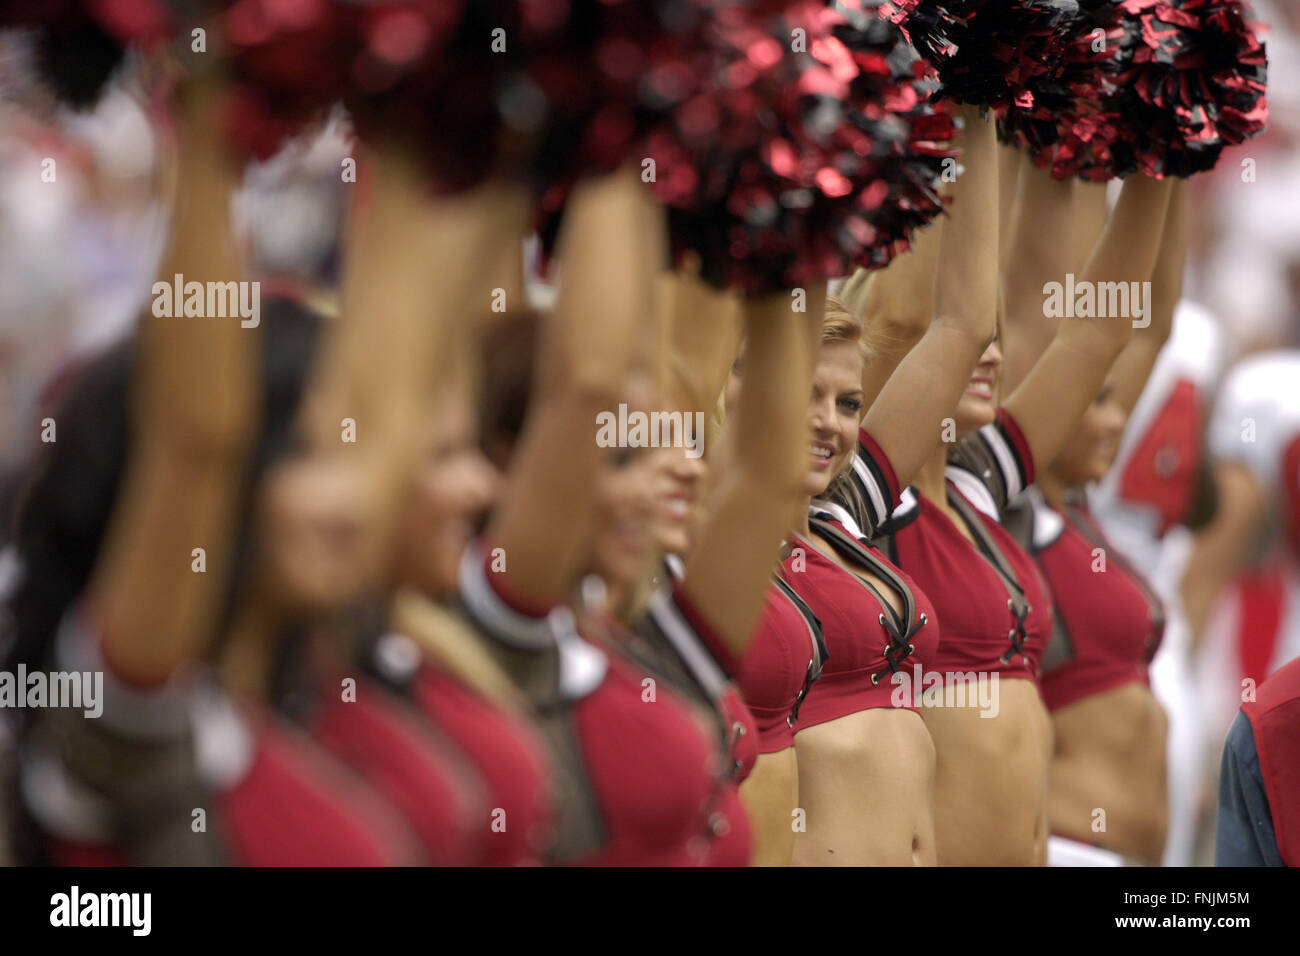 Tampa, Florida, USA. 10th Sep, 2006. Sept. 10, 2006; Tampa, FL, USA; Tampa Bay Buccaneers cheerleaders during the Bucs game against the Baltimore Ravens at Raymond James Stadium. ZUMA Press/Scott A. Miller © Scott A. Miller/ZUMA Wire/Alamy Live News Stock Photo